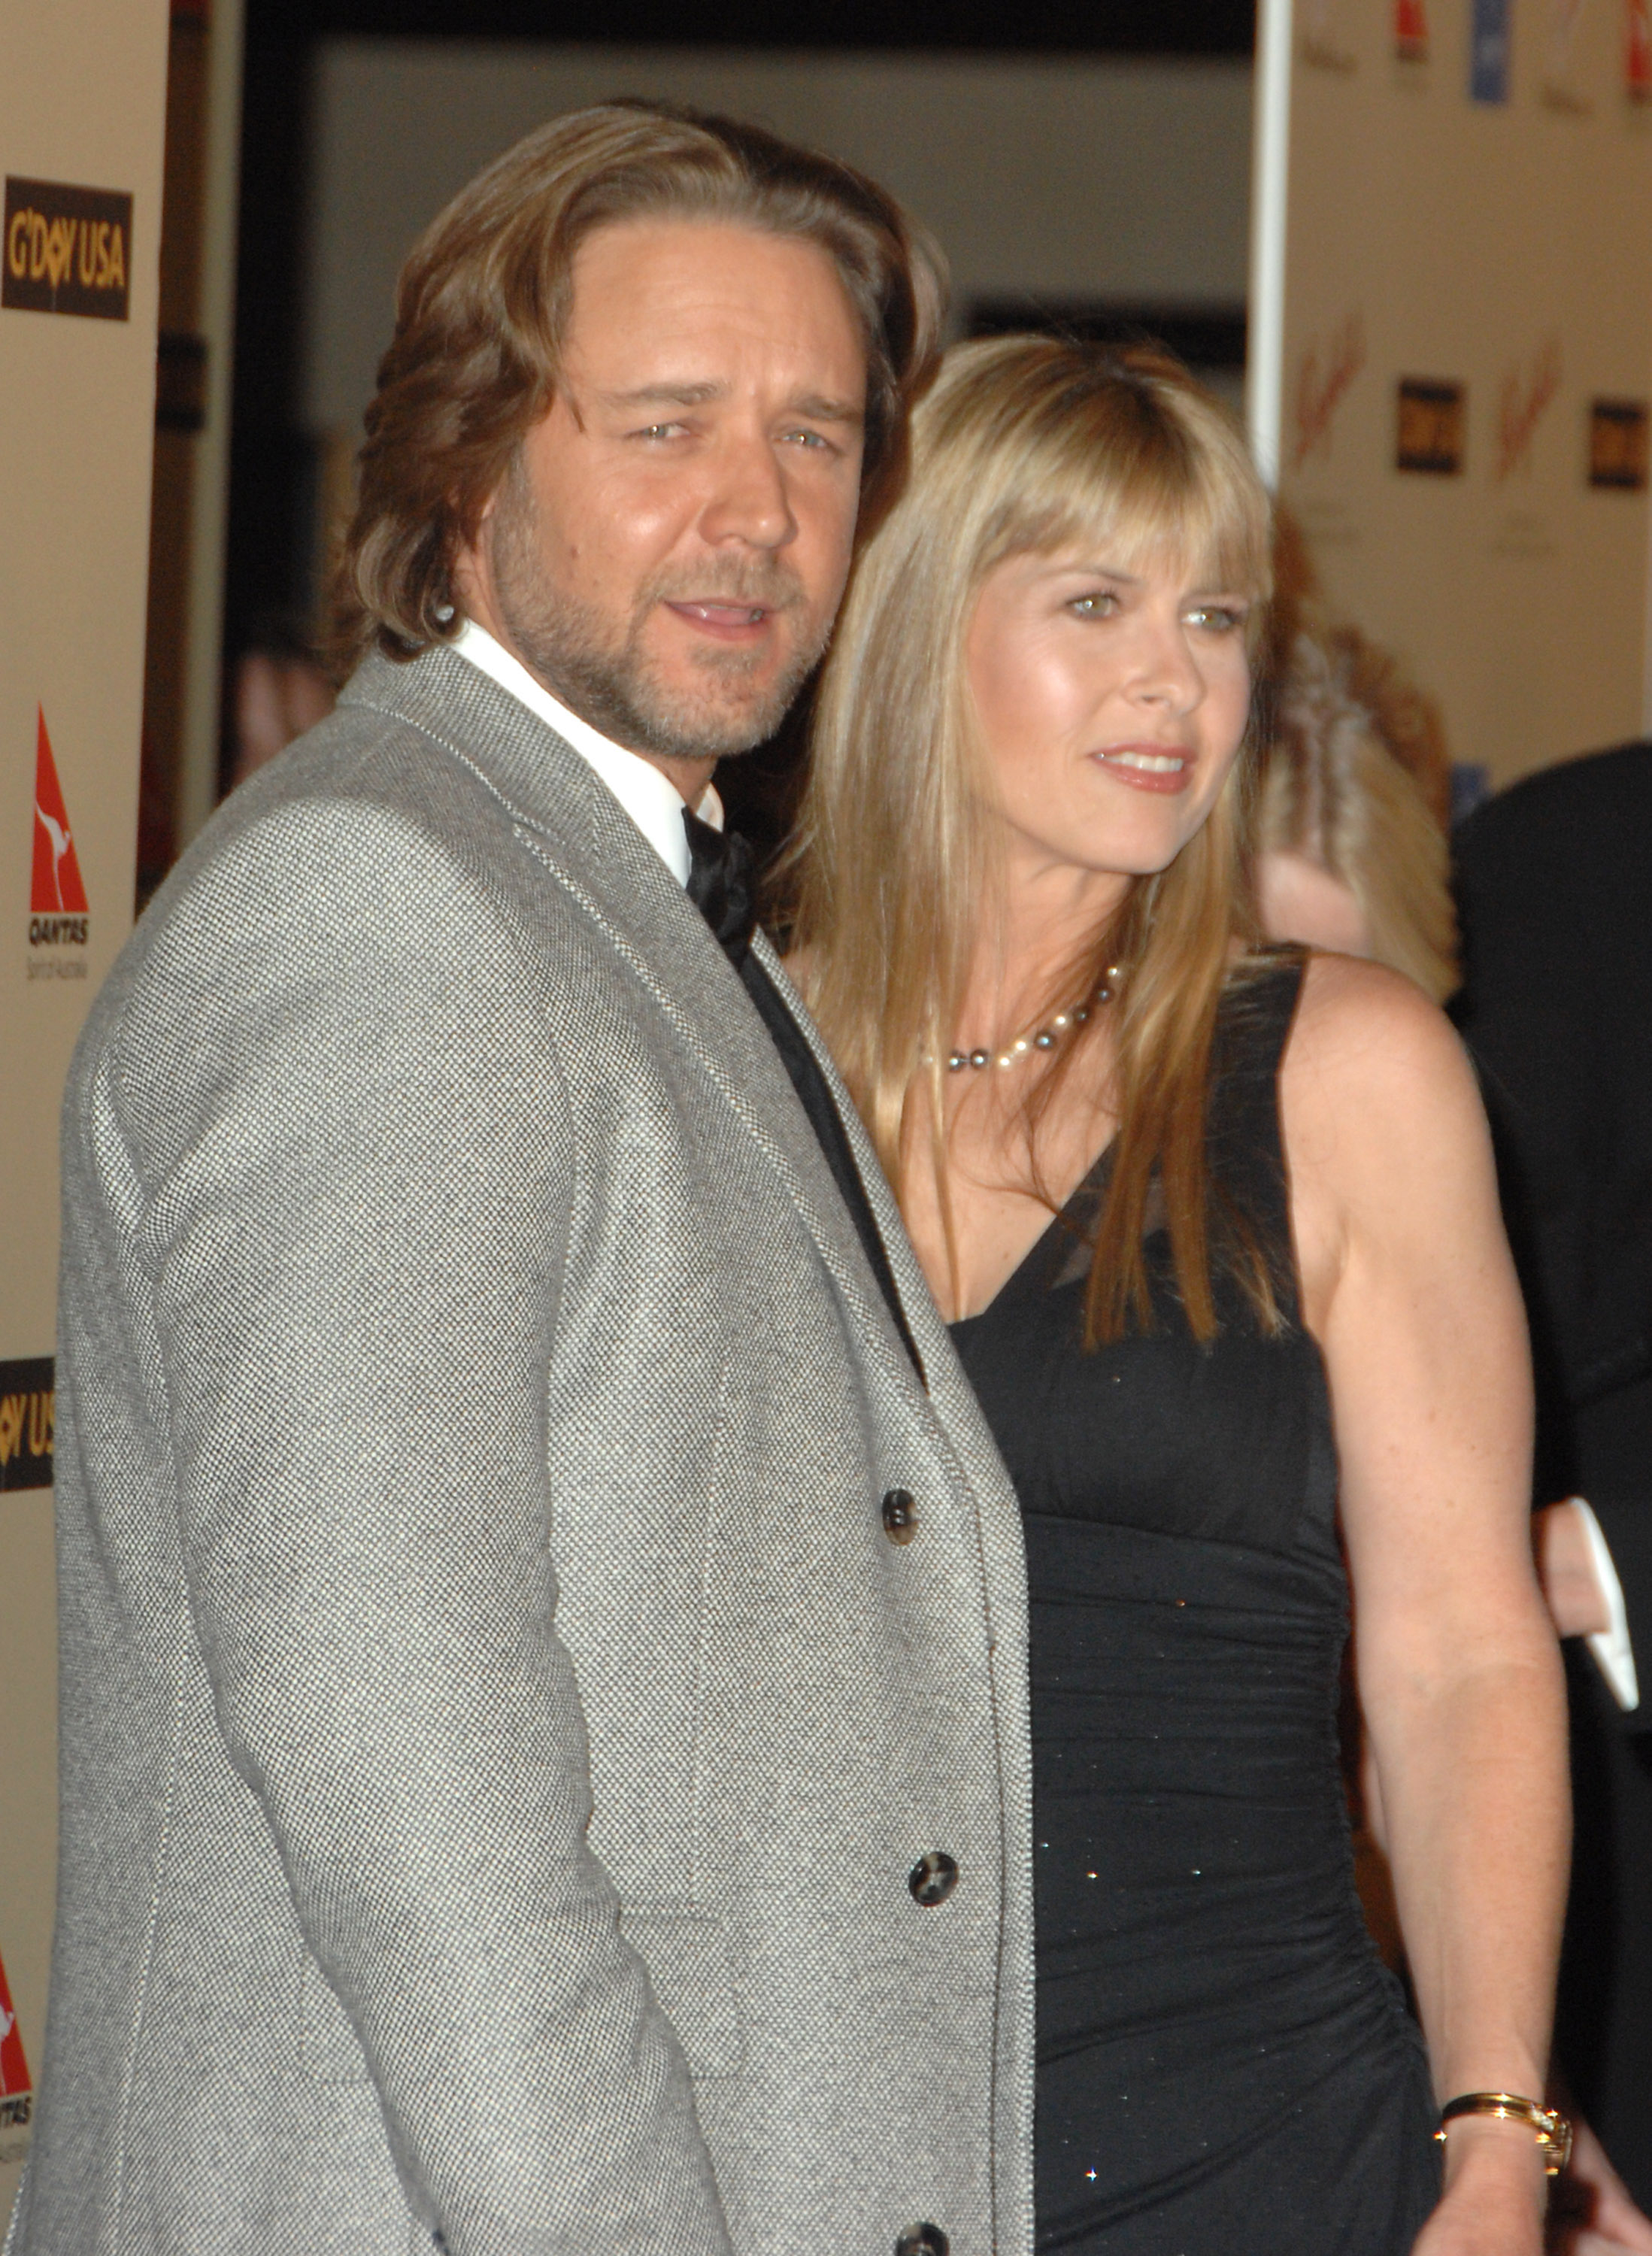 Russell Crowe and Terri Irwin at the 2007 Australia Week Gala in Los Angeles | Source: Getty Images